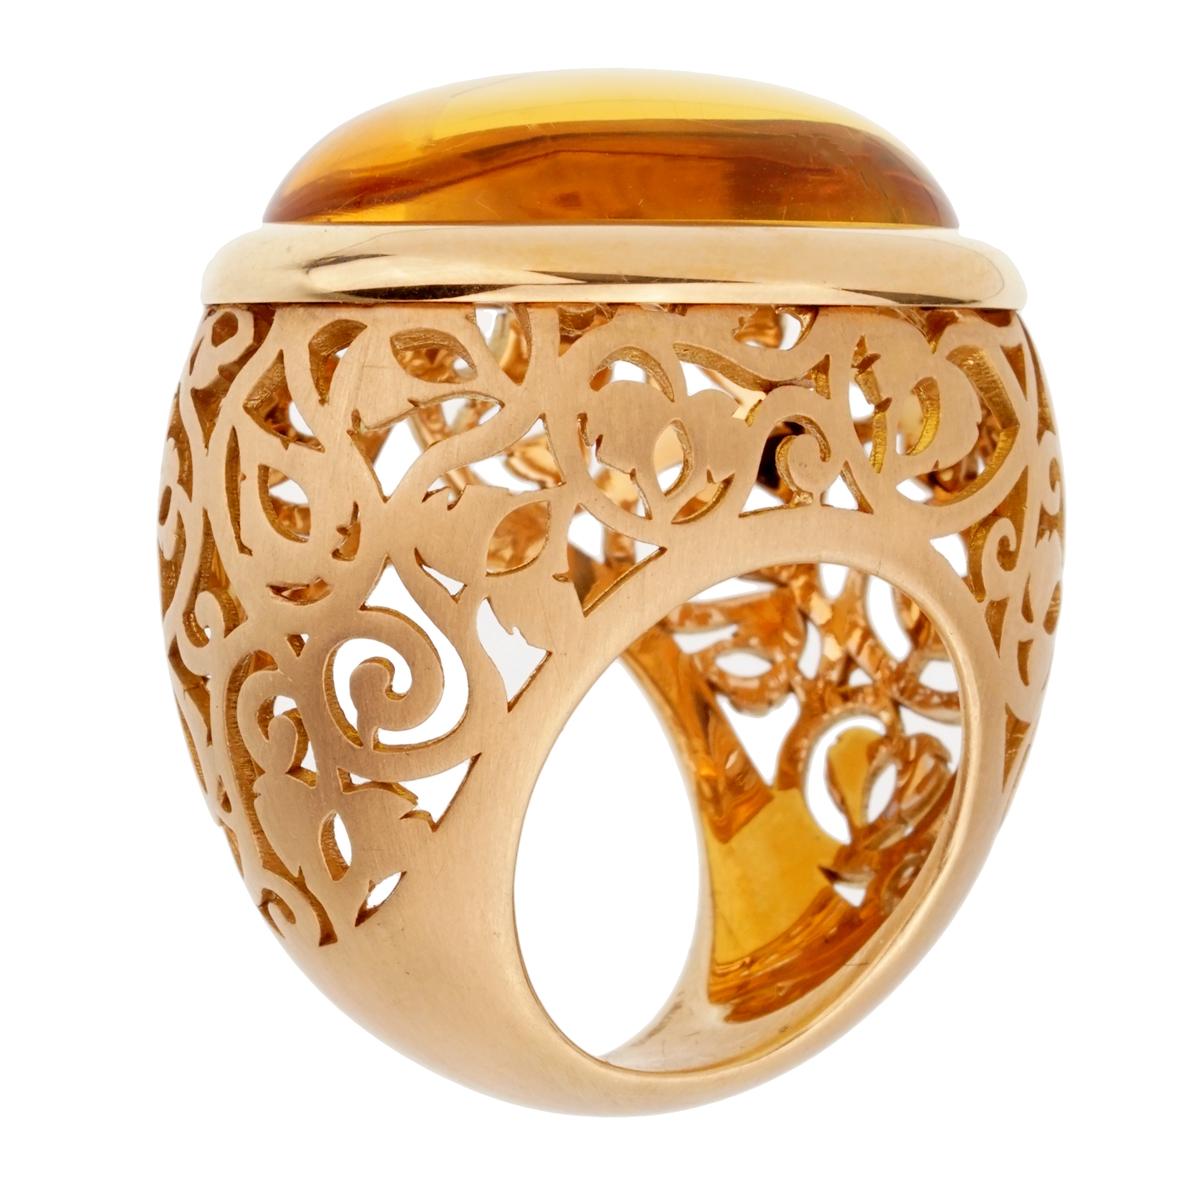 A magnificent brand new Pomellato rose gold cocktail ring showcasing a 19.94ct cabochon Amber. The ring measures a size 5.25 and can be resized.

Pomellato Retail Price: $7,800
Sku: 2328